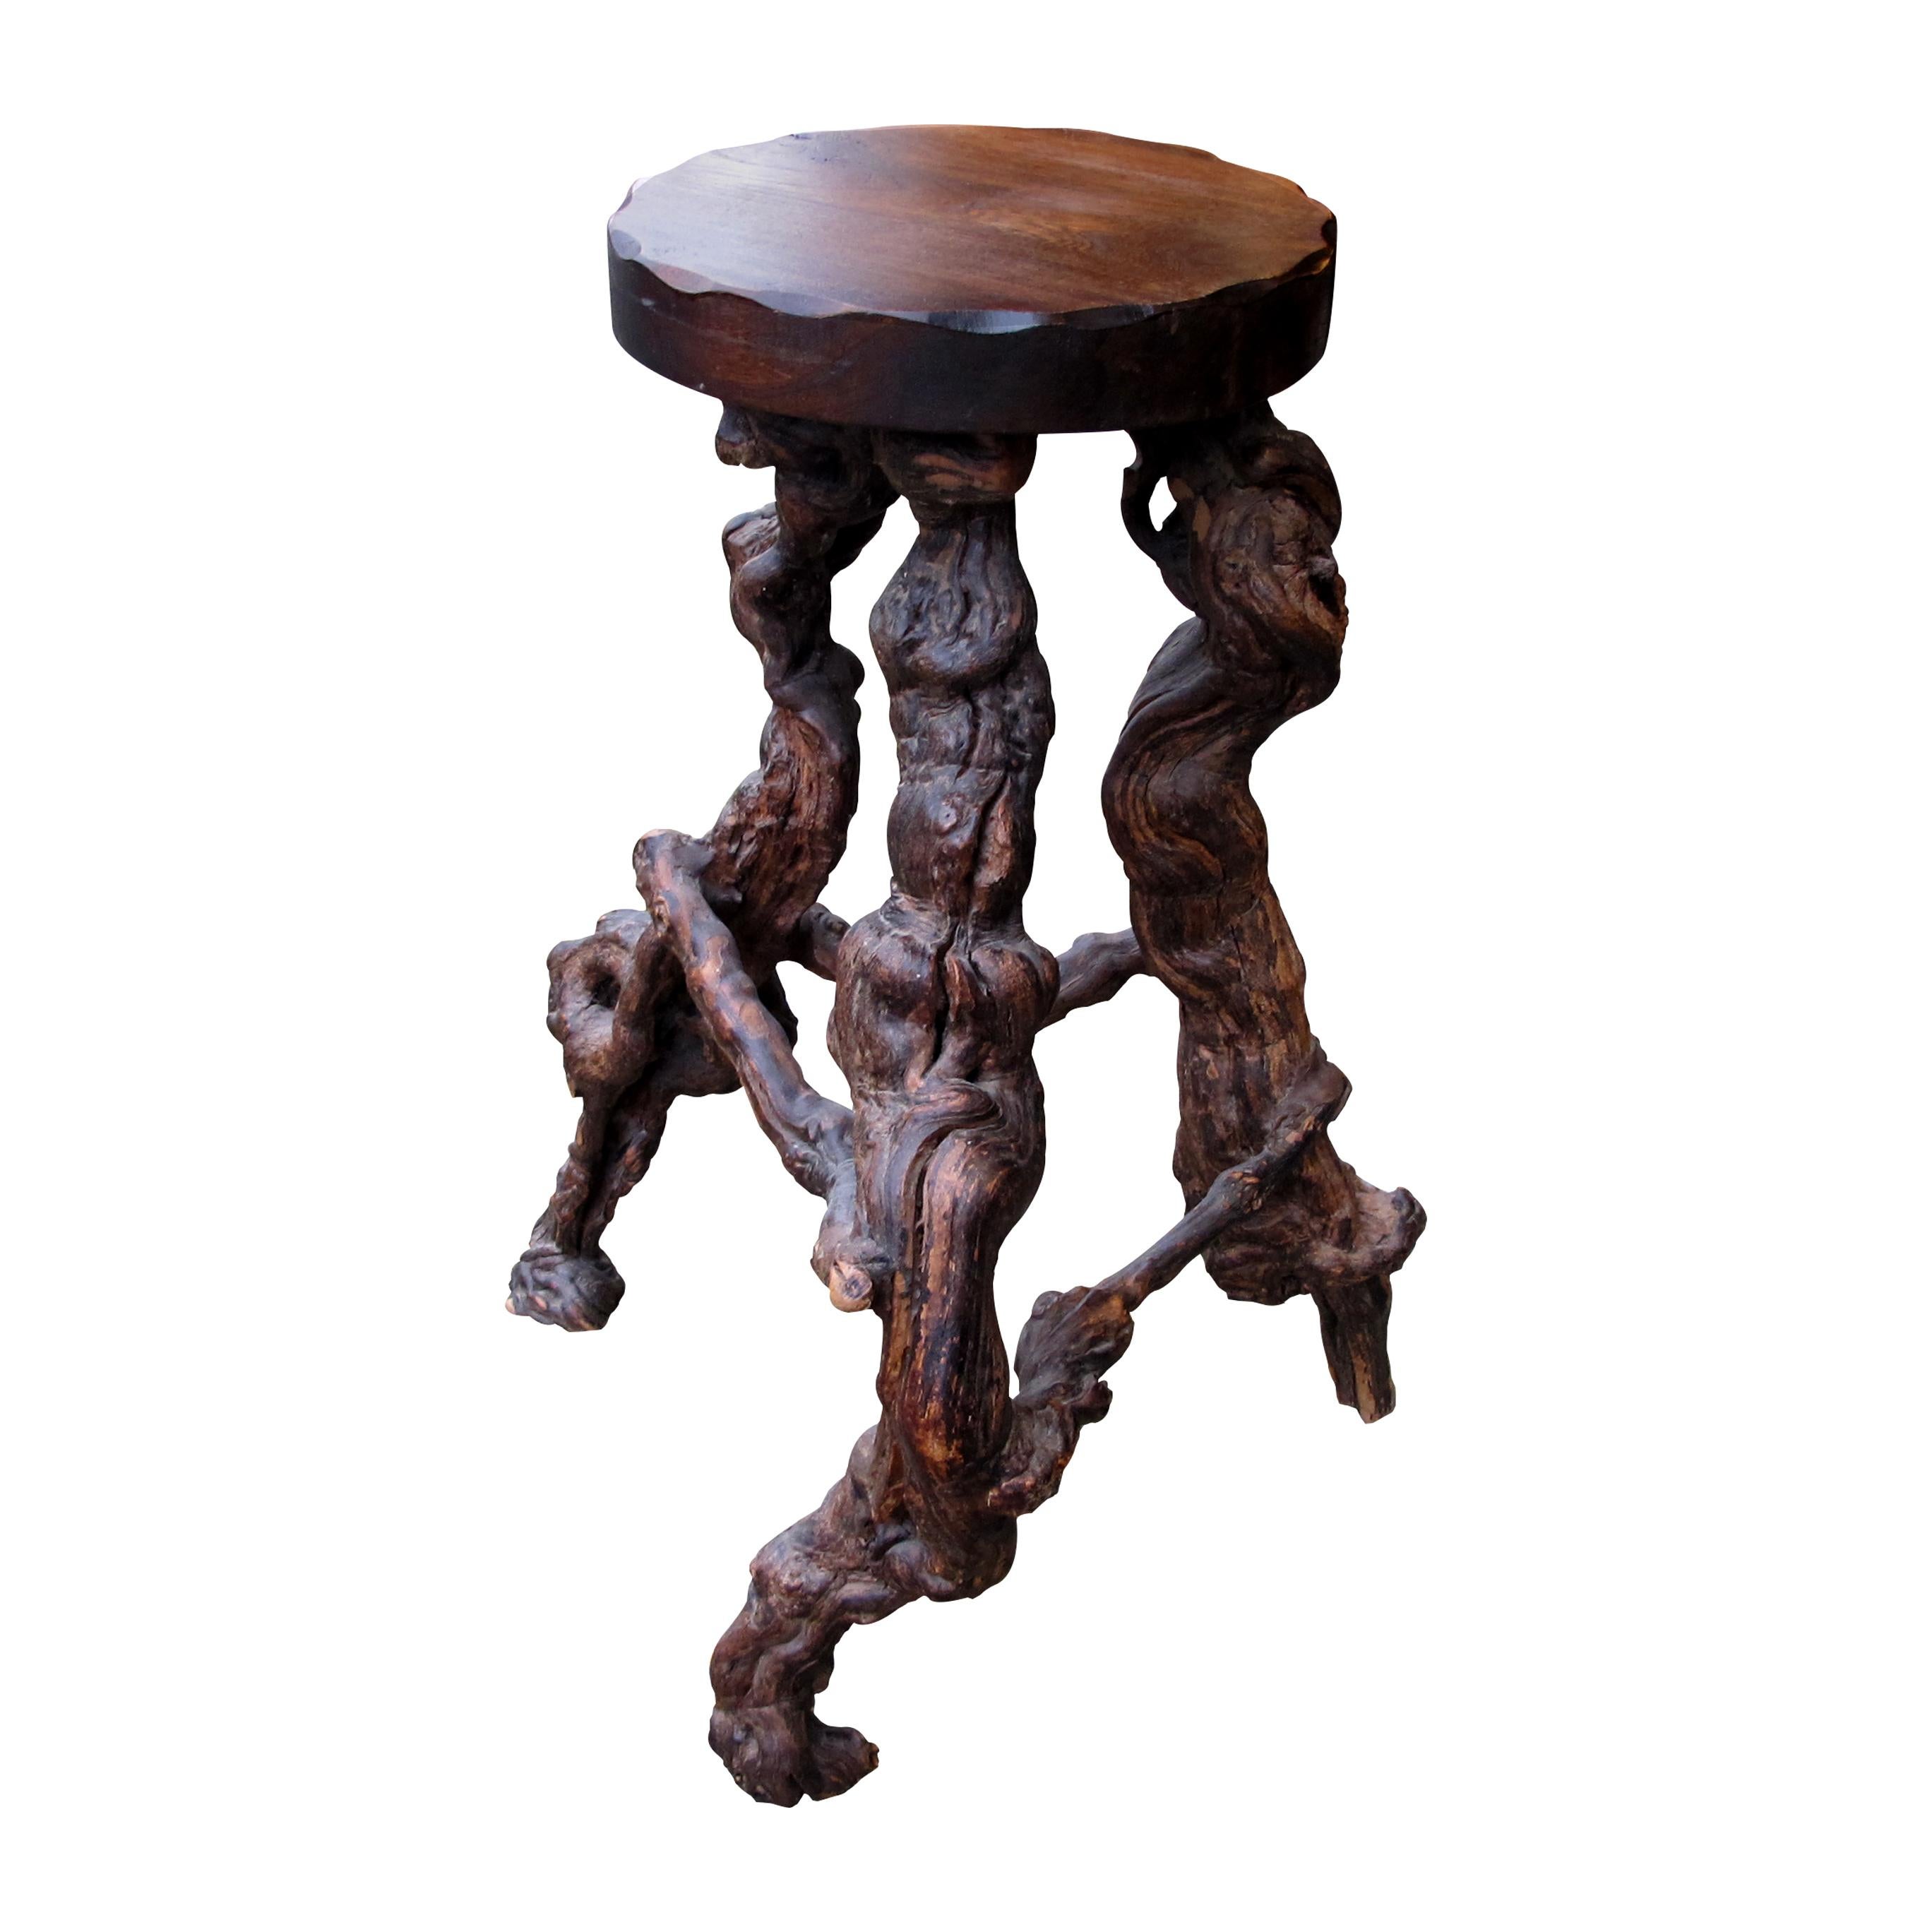 An unusual set of 3 French 1950s mid-century grapevine bar stools. These unique and bespoke stools have been handcrafted individually; the base is made of naturally twisted vine roots; therefore, making each stool unique. The stools have acquired a